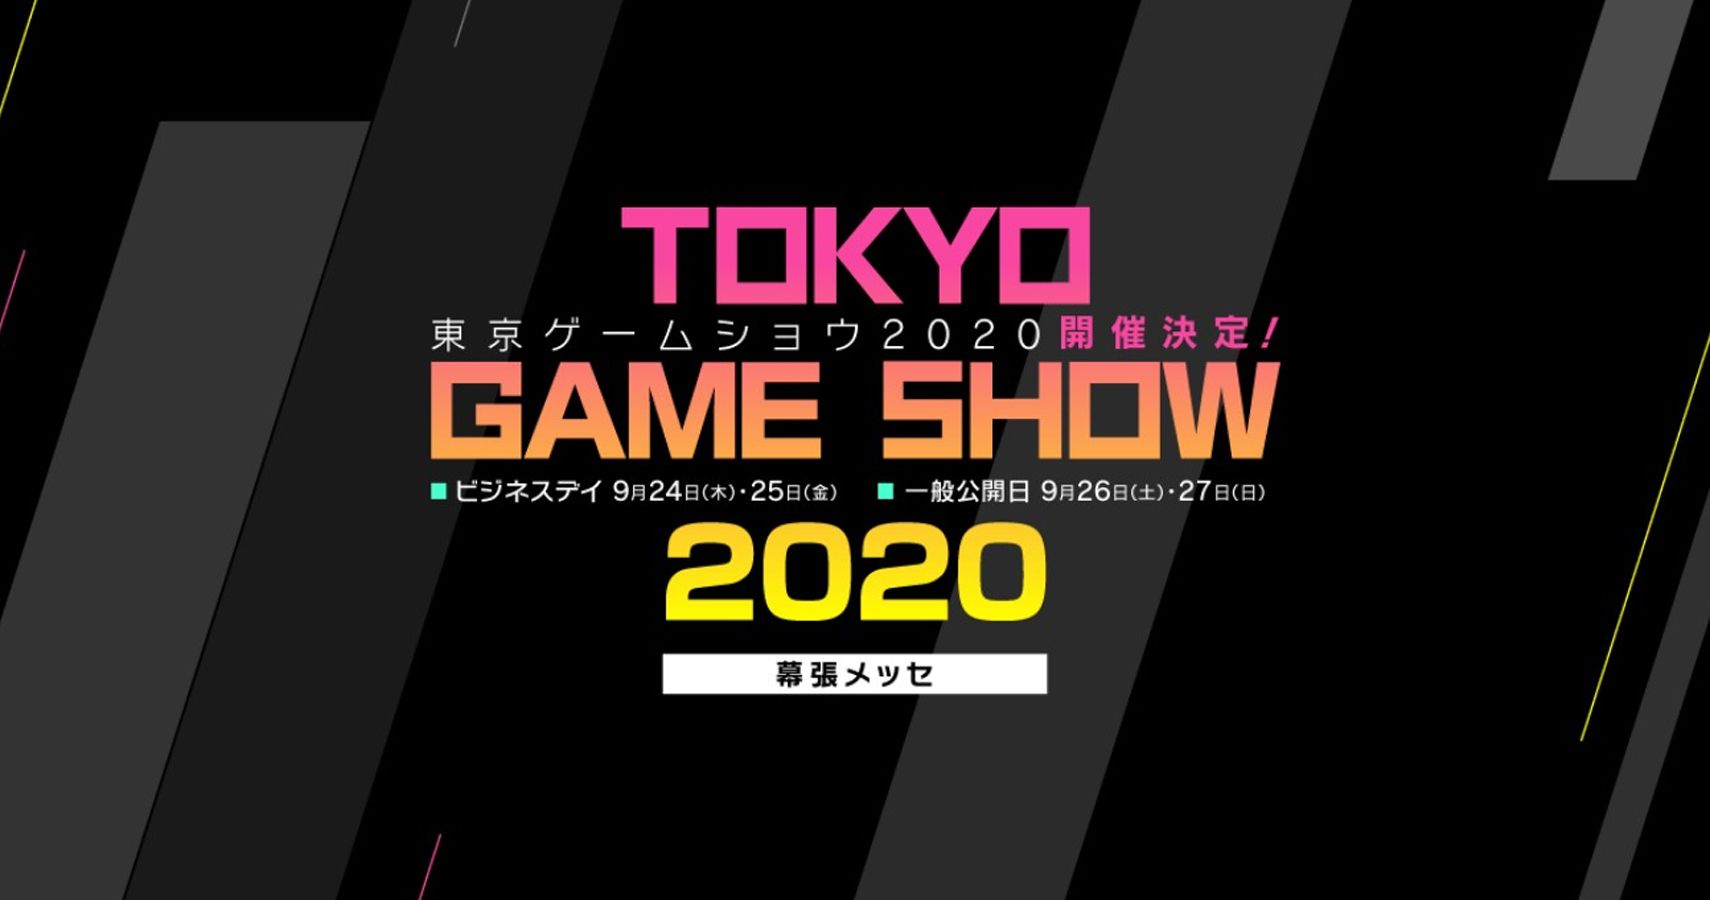 The Tokyo Game Show 2020 Is Now Being Held Online